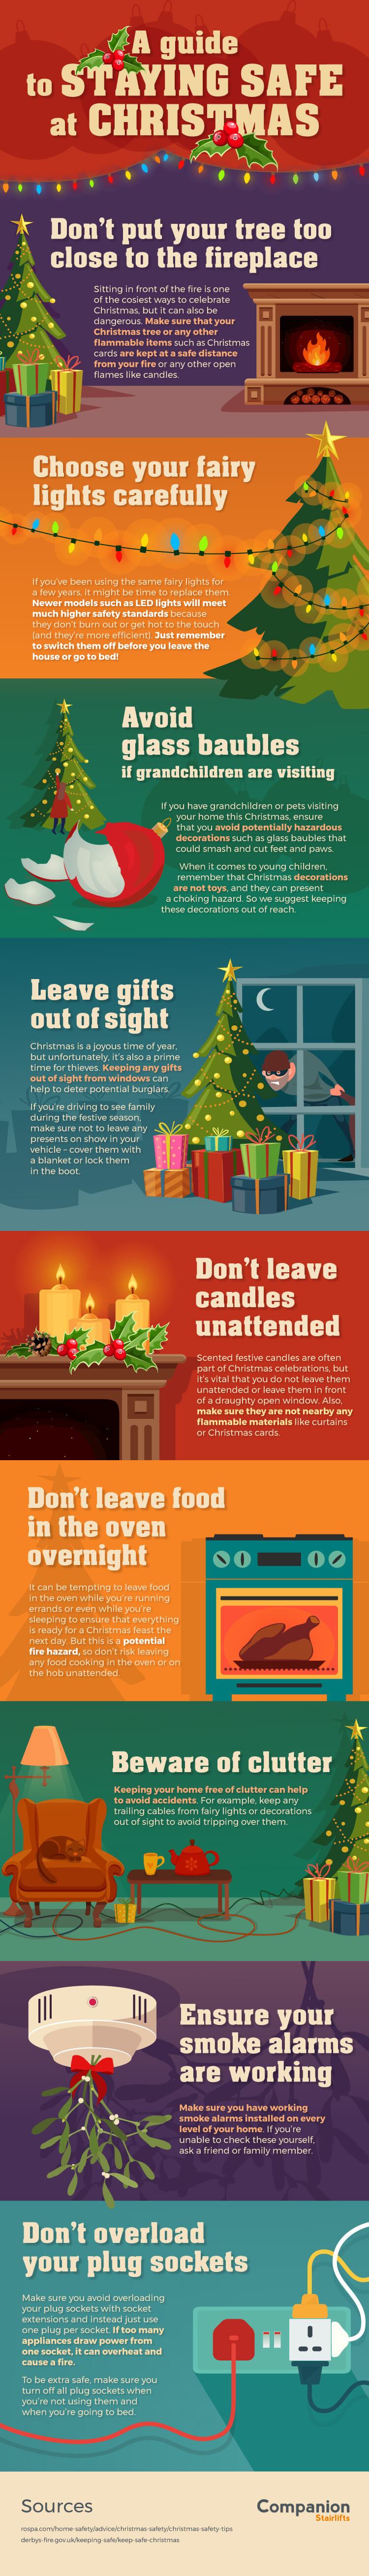 A Guide to Staying Safe at Christmas